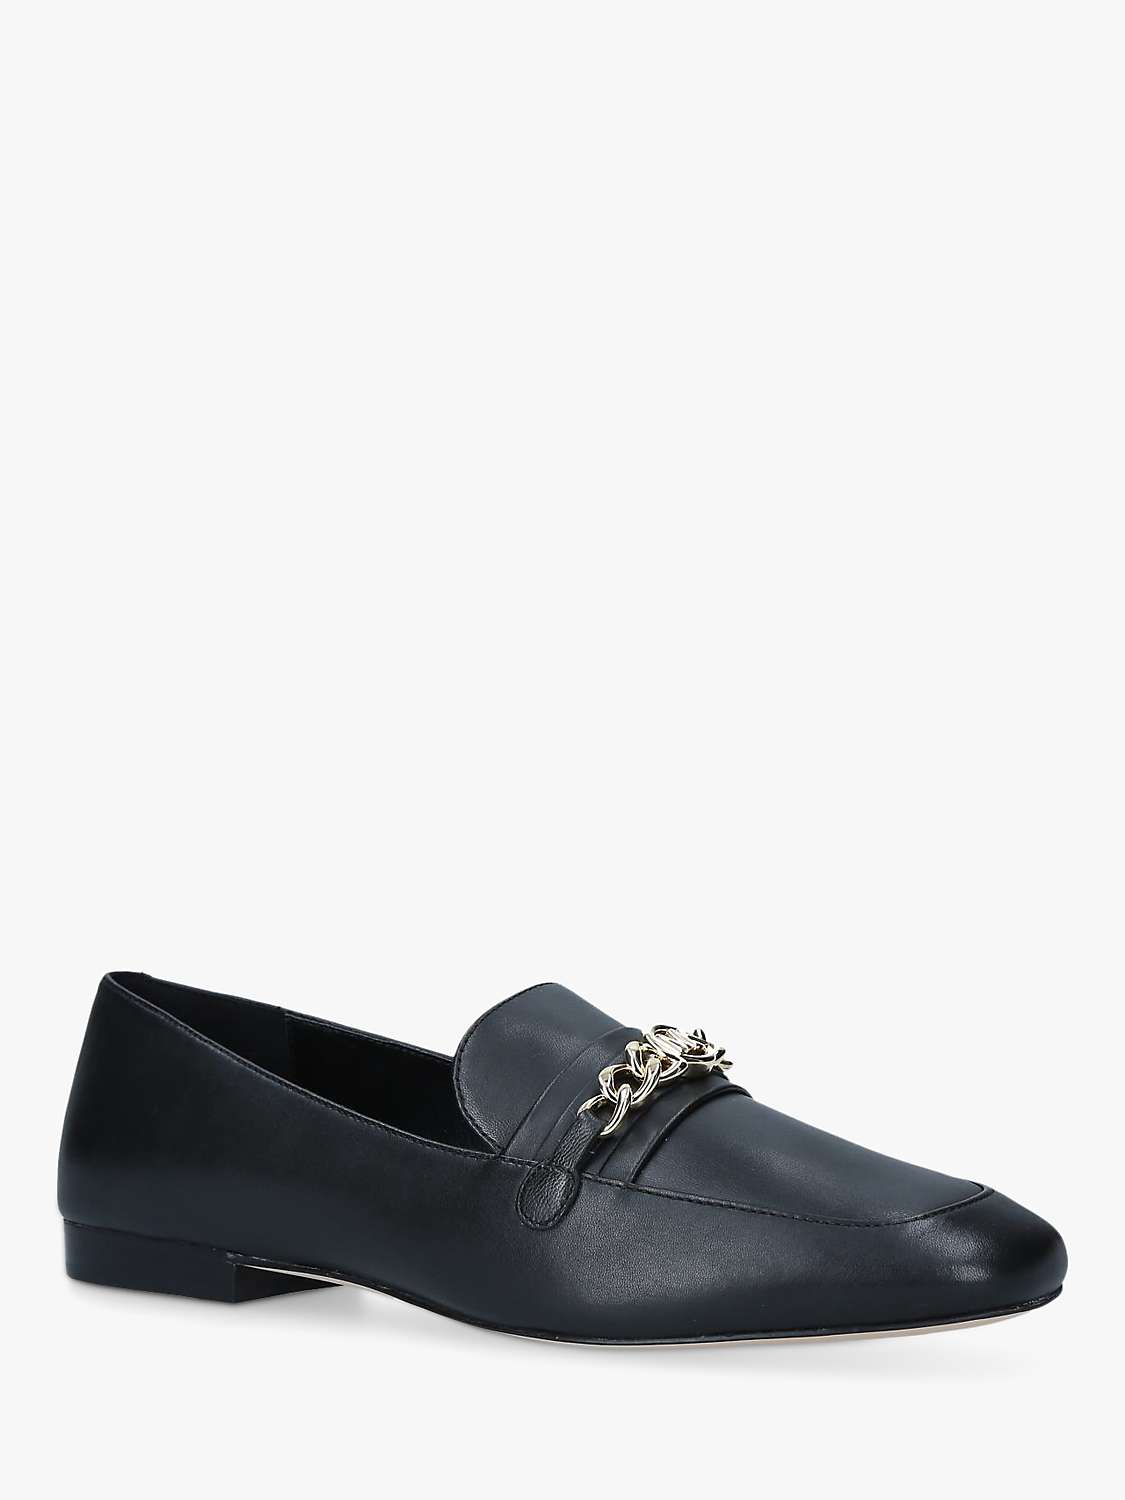 Buy MICHAEL Michael Kors Dolores Leather Loafers, Black Online at johnlewis.com